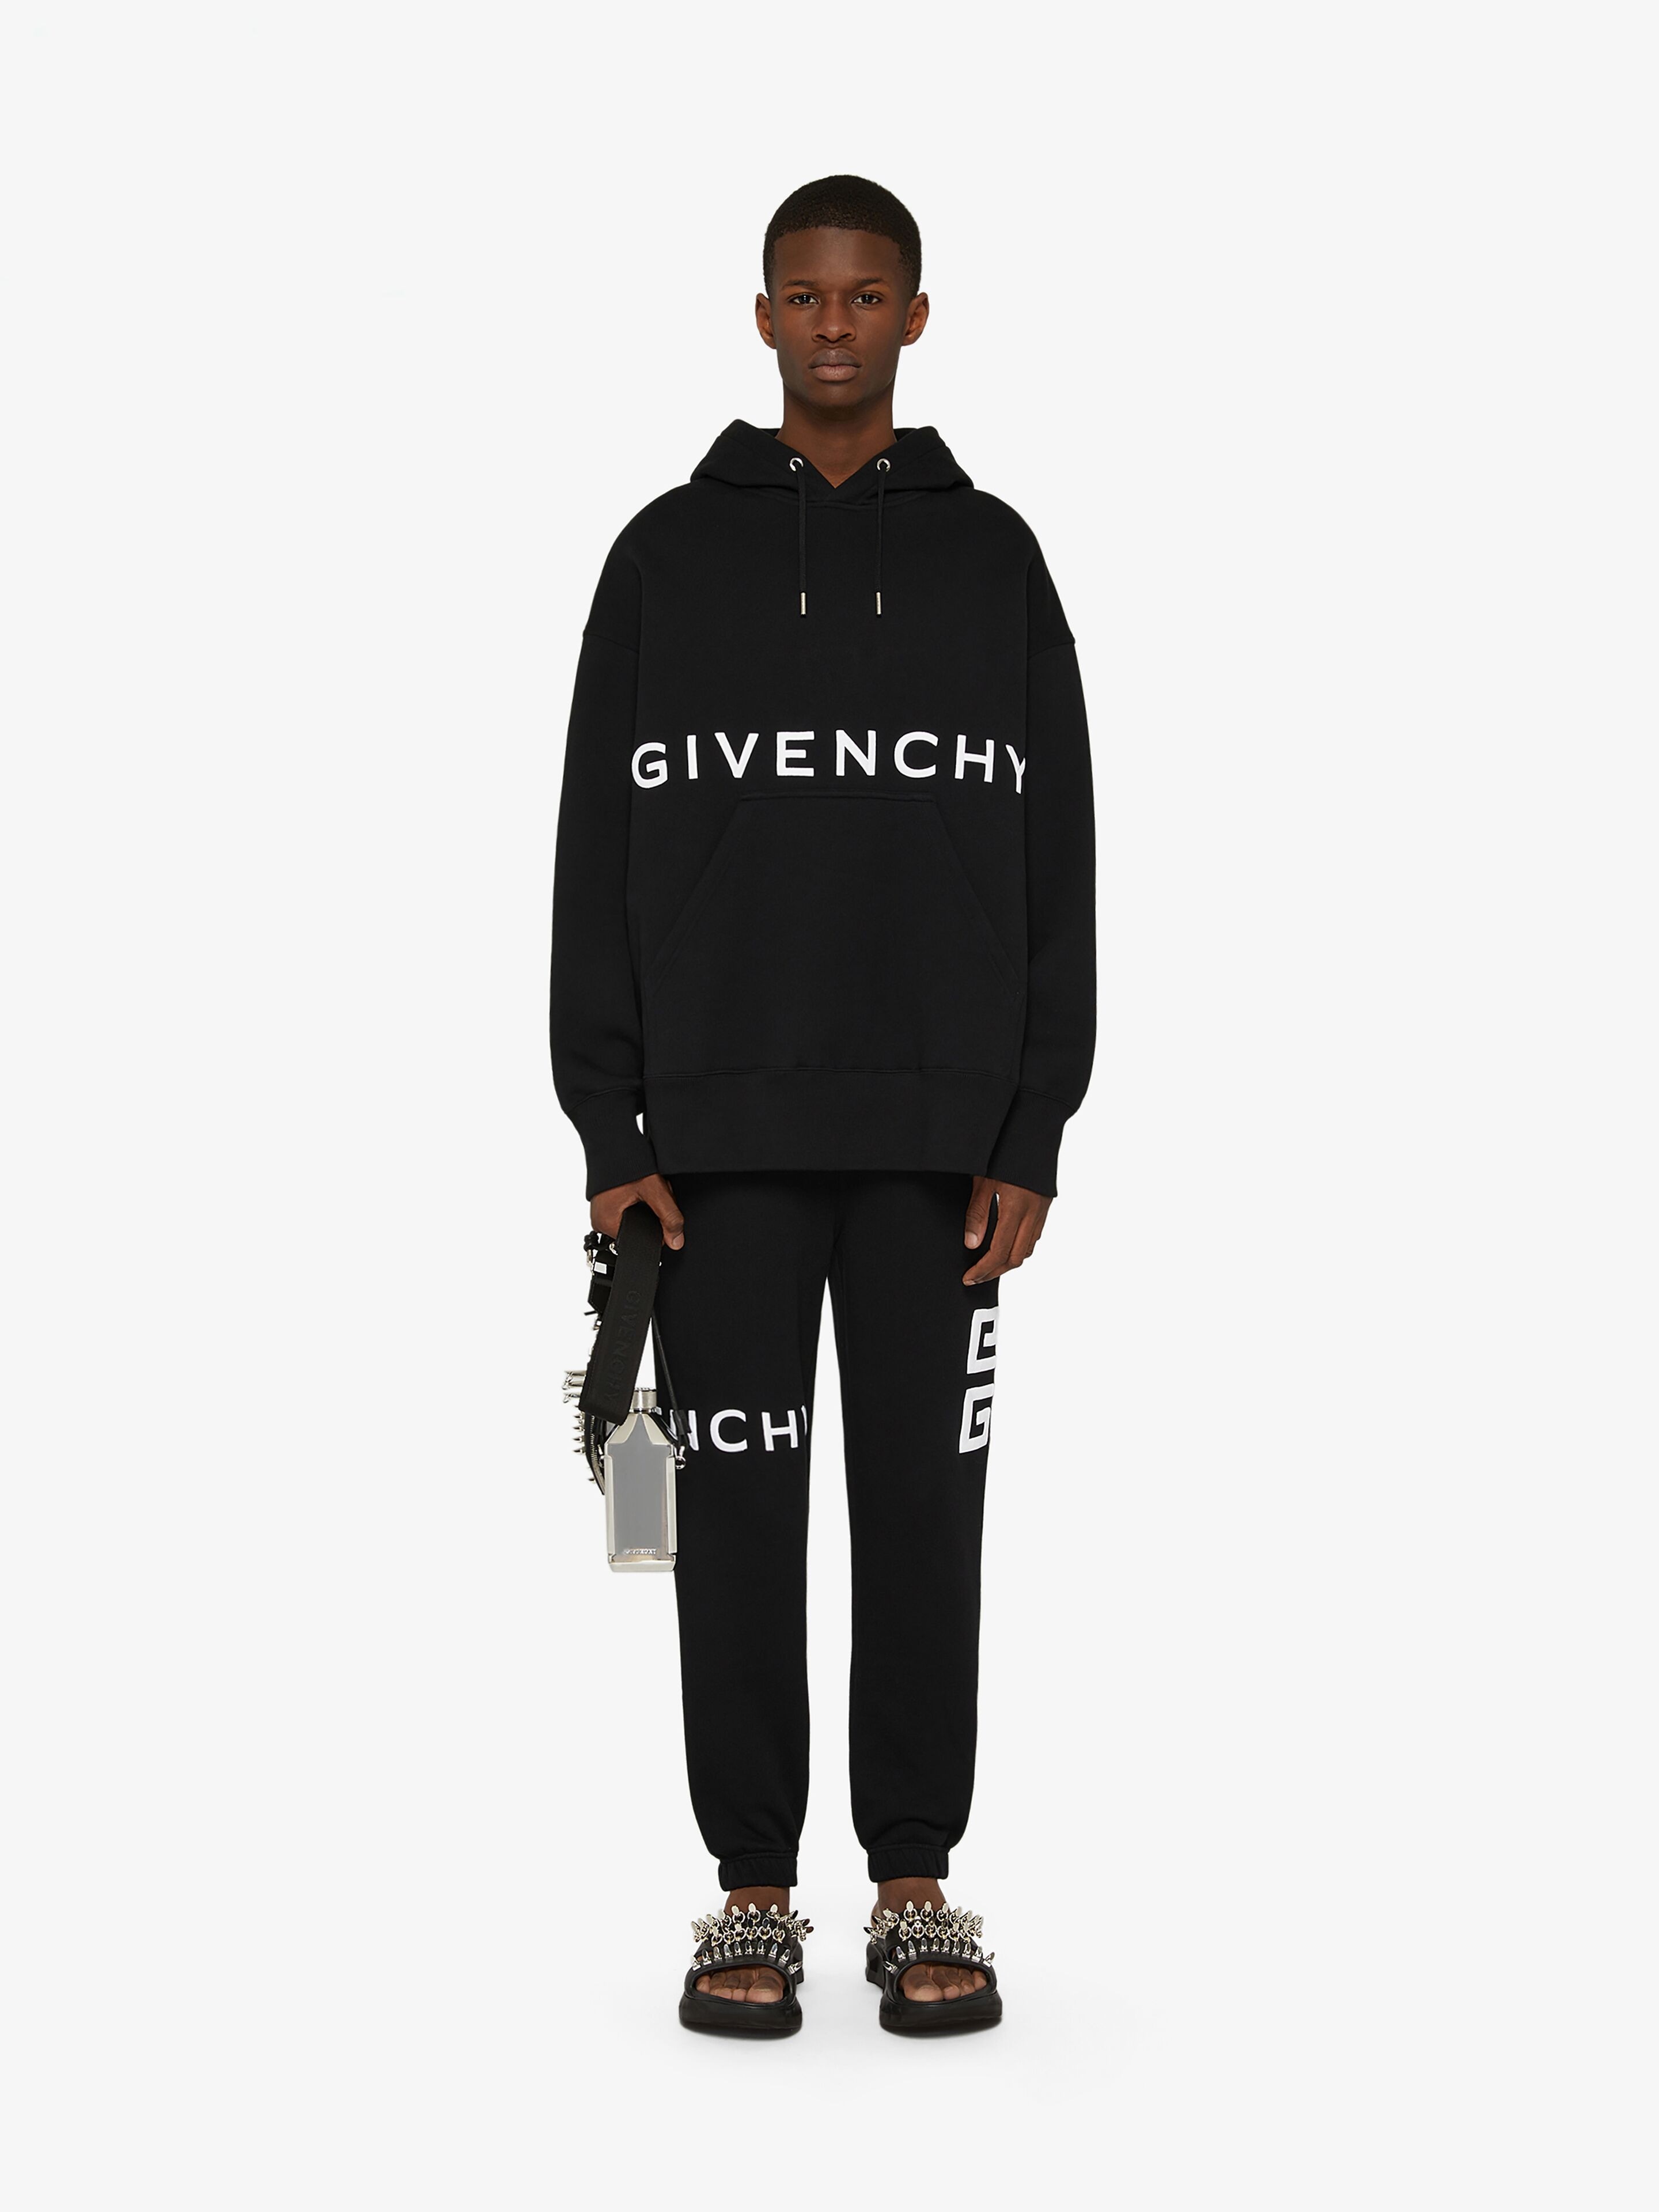 givenchy's post